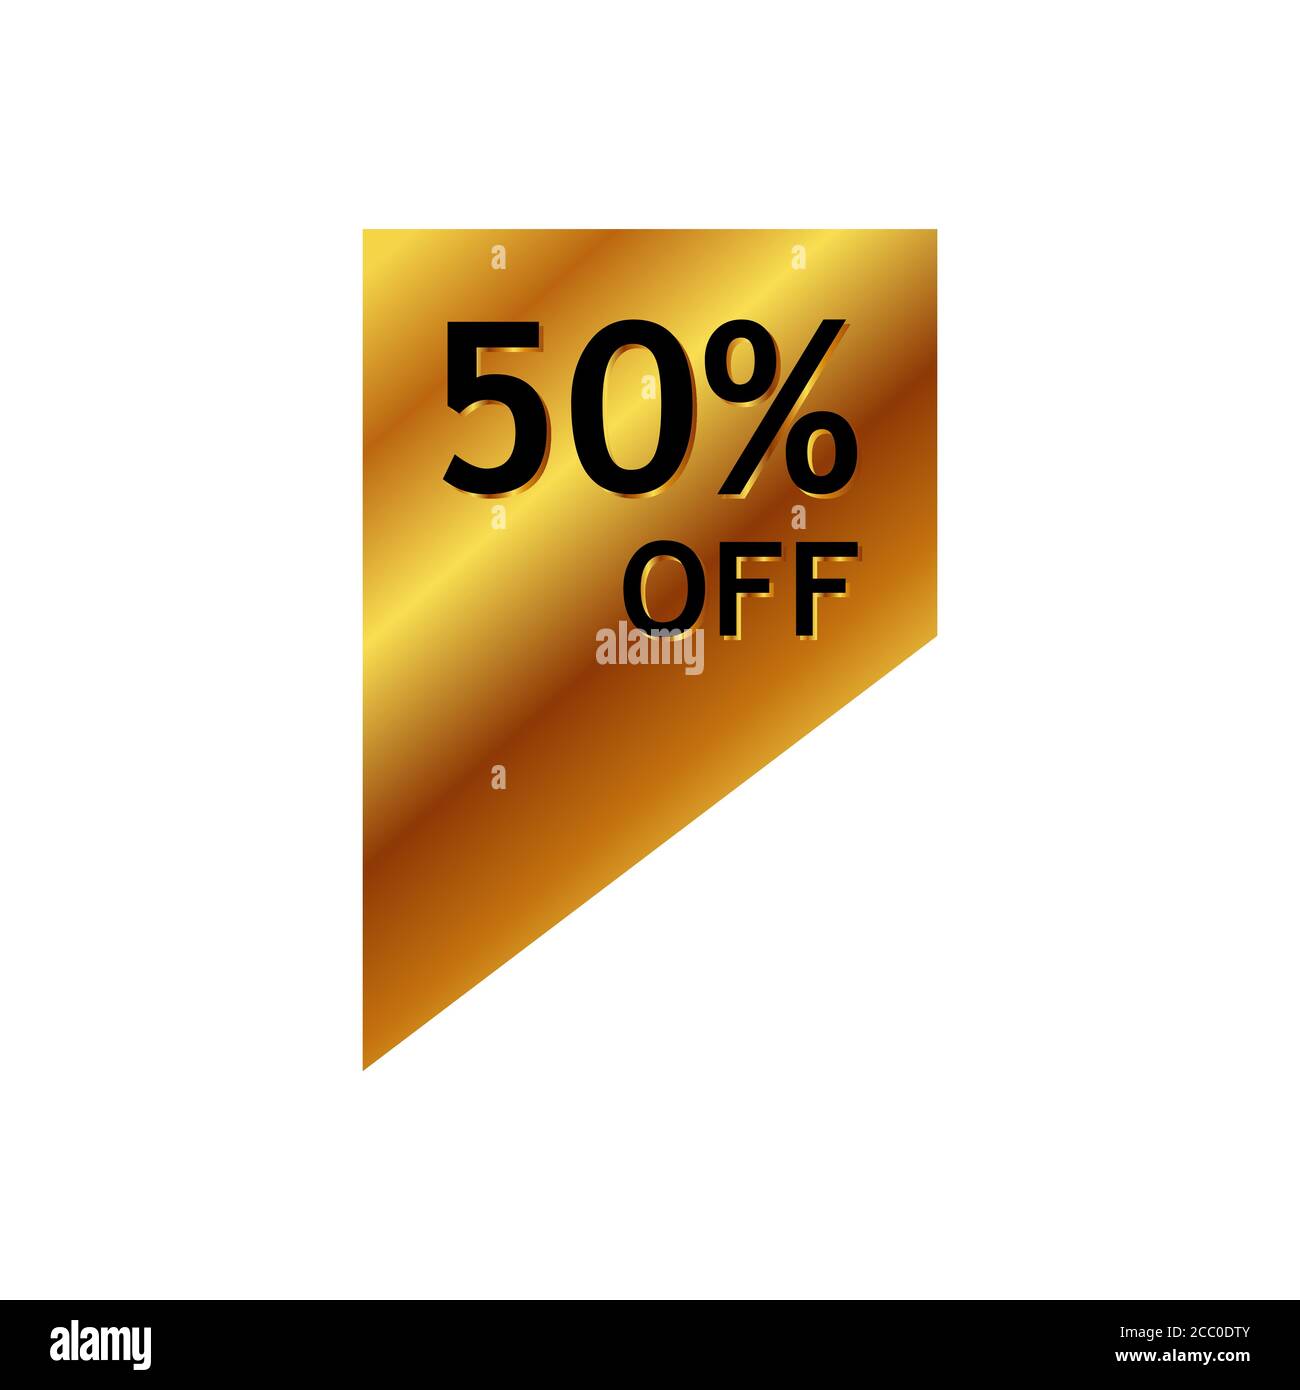 https://c8.alamy.com/comp/2CC0DTY/50-off-sale-design-40-percent-special-discount-offer-banner-marketing-promotional-poster-vector-template-2CC0DTY.jpg